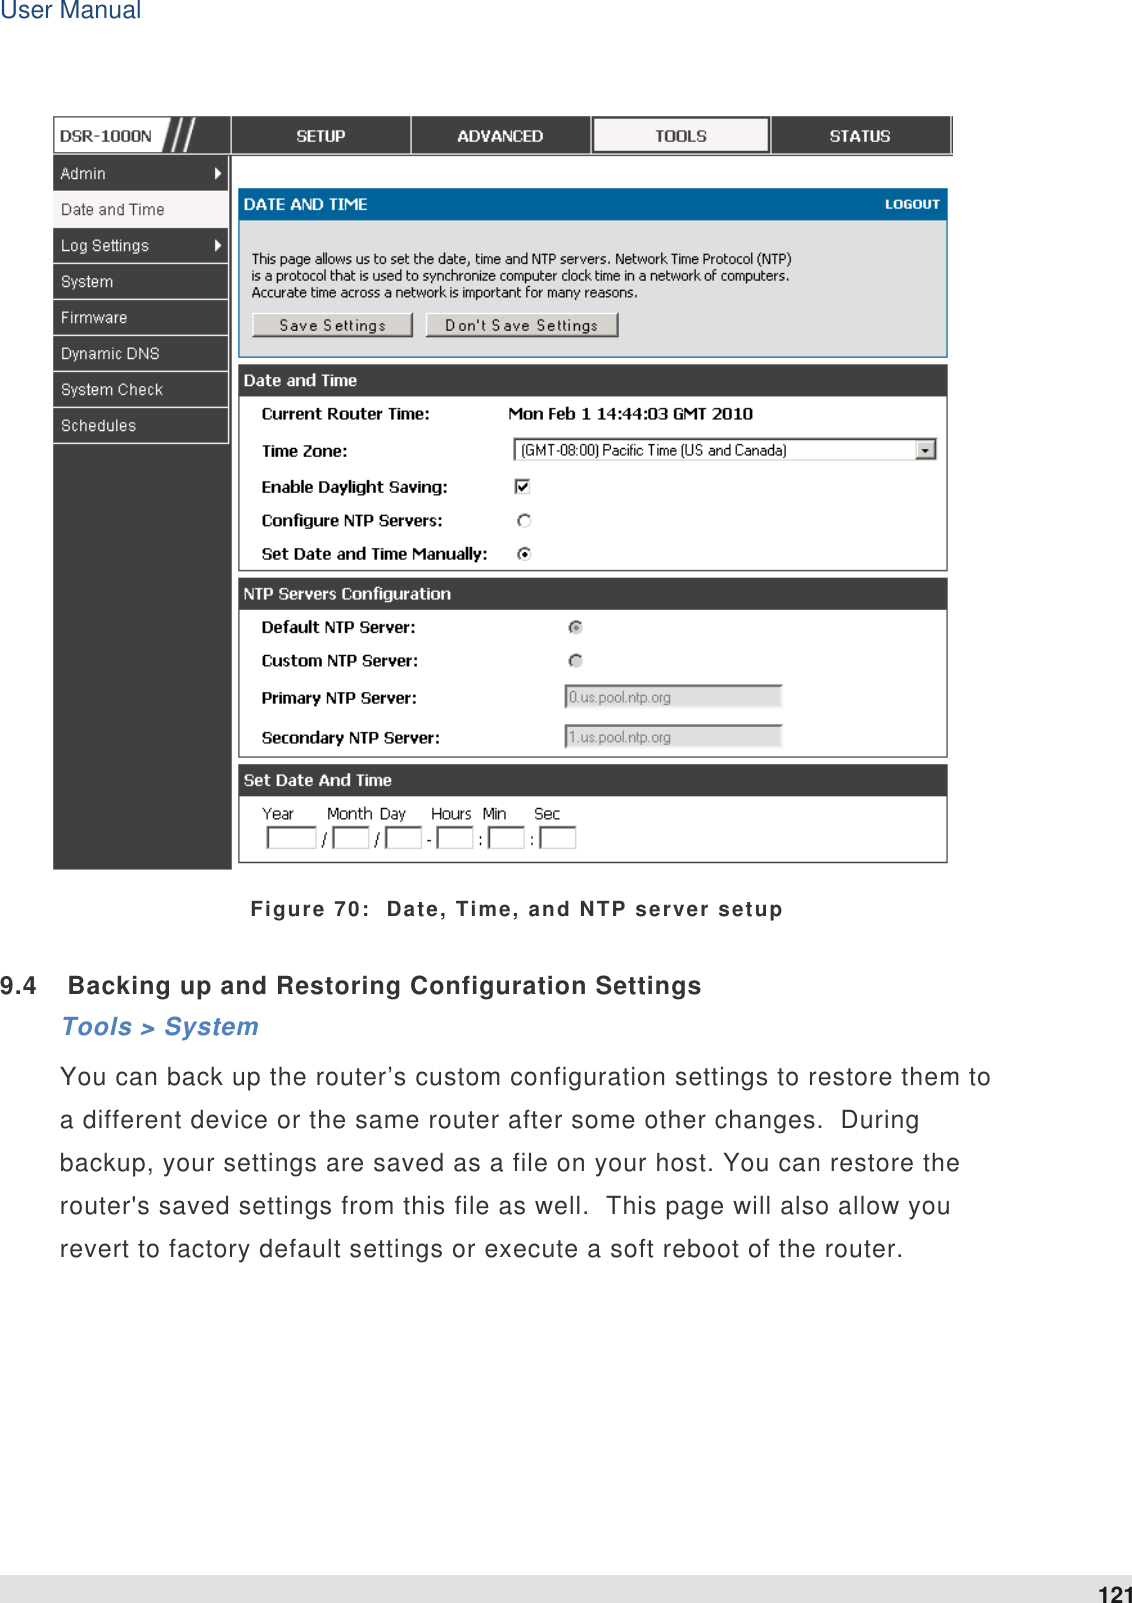 User Manual 121    Figure 70:  Date, Time, and NTP server setup 9.4  Backing up and Restoring Configuration Settings Tools &gt; System You can back up the router’s custom configuration settings to restore them to a different device or the same router after some other changes.  During backup, your settings are saved as a file on your host. You can restore the router&apos;s saved settings from this file as well.  This page will also allow you revert to factory default settings or execute a soft reboot of the router.   